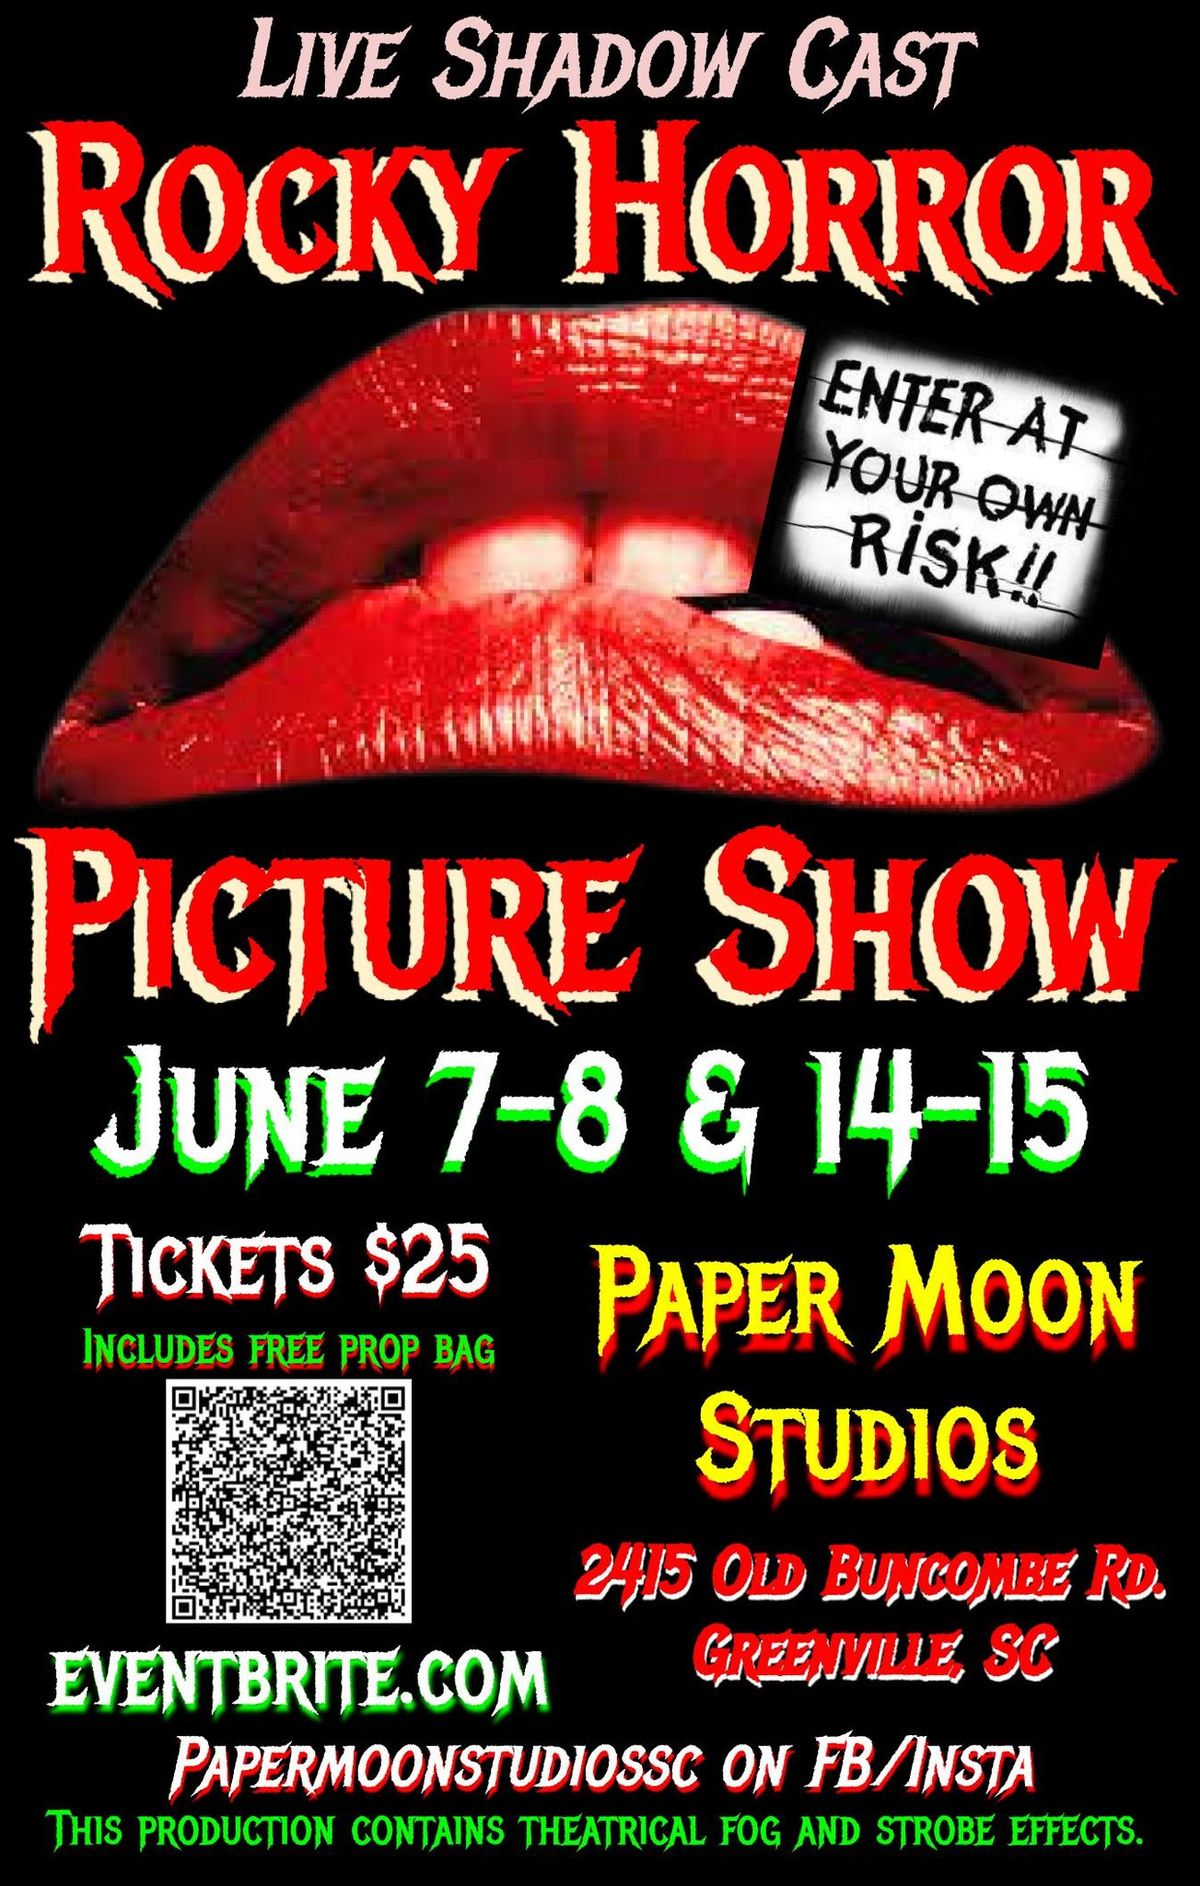 The Rocky Horror Picture Show presented by Paper Moon Studios